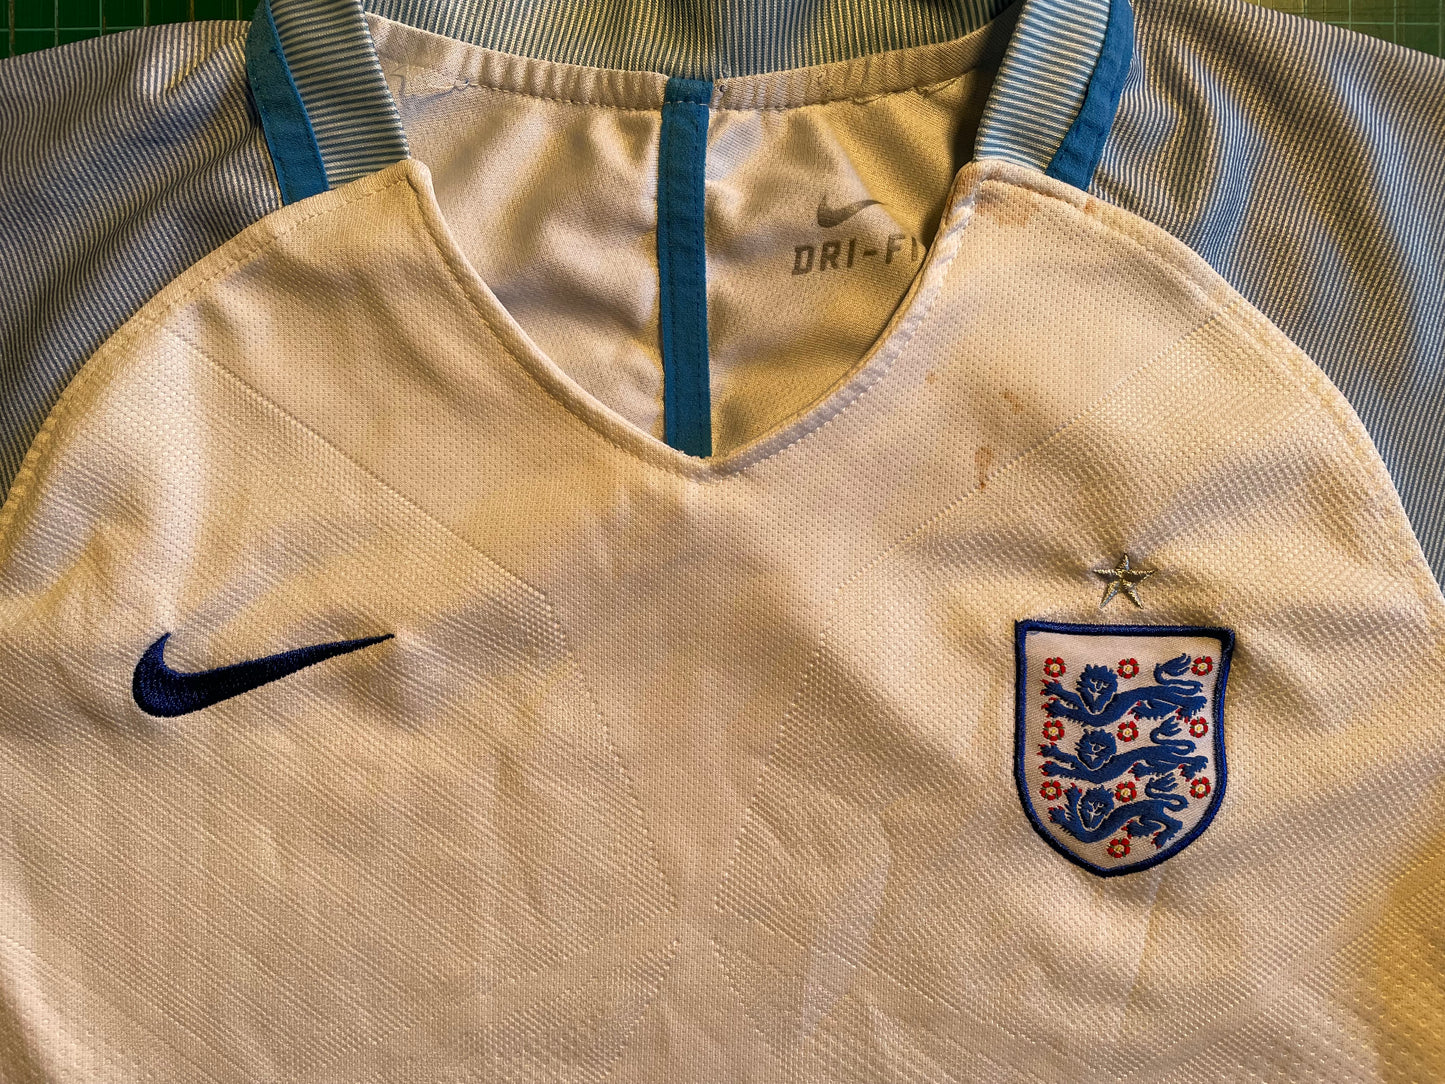 England 2016 Home Shirt (poor) Medium Boys size 24. Age 10-12? Height 16.5 inches.